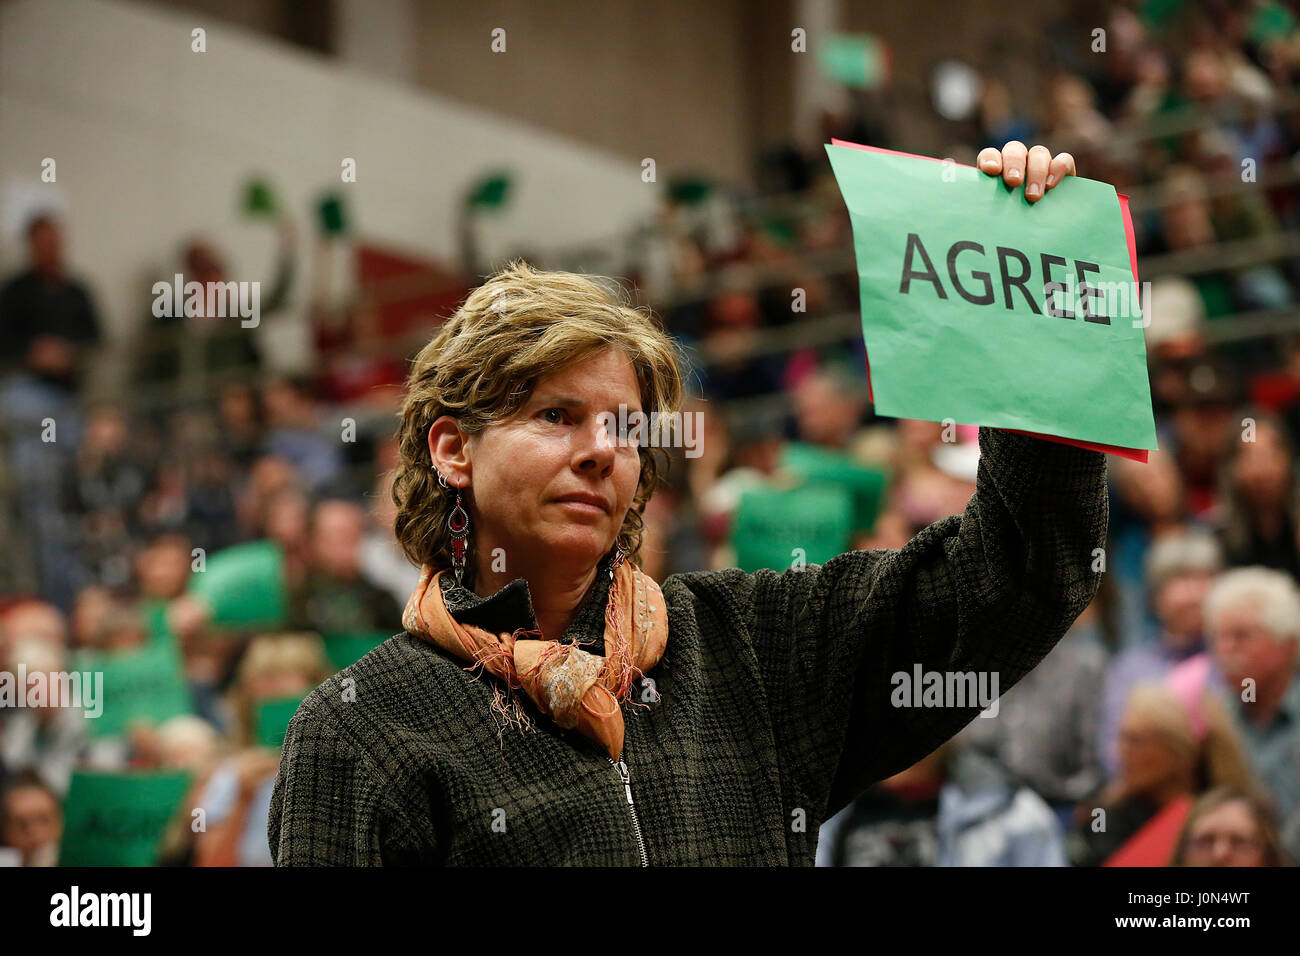 A woman signals her support of criticism of U.S. Rep. Greg Walden (R-OR) during a constituent town hall meeting on April 13, 2017. Bend, Oregon, United States. Stock Photo